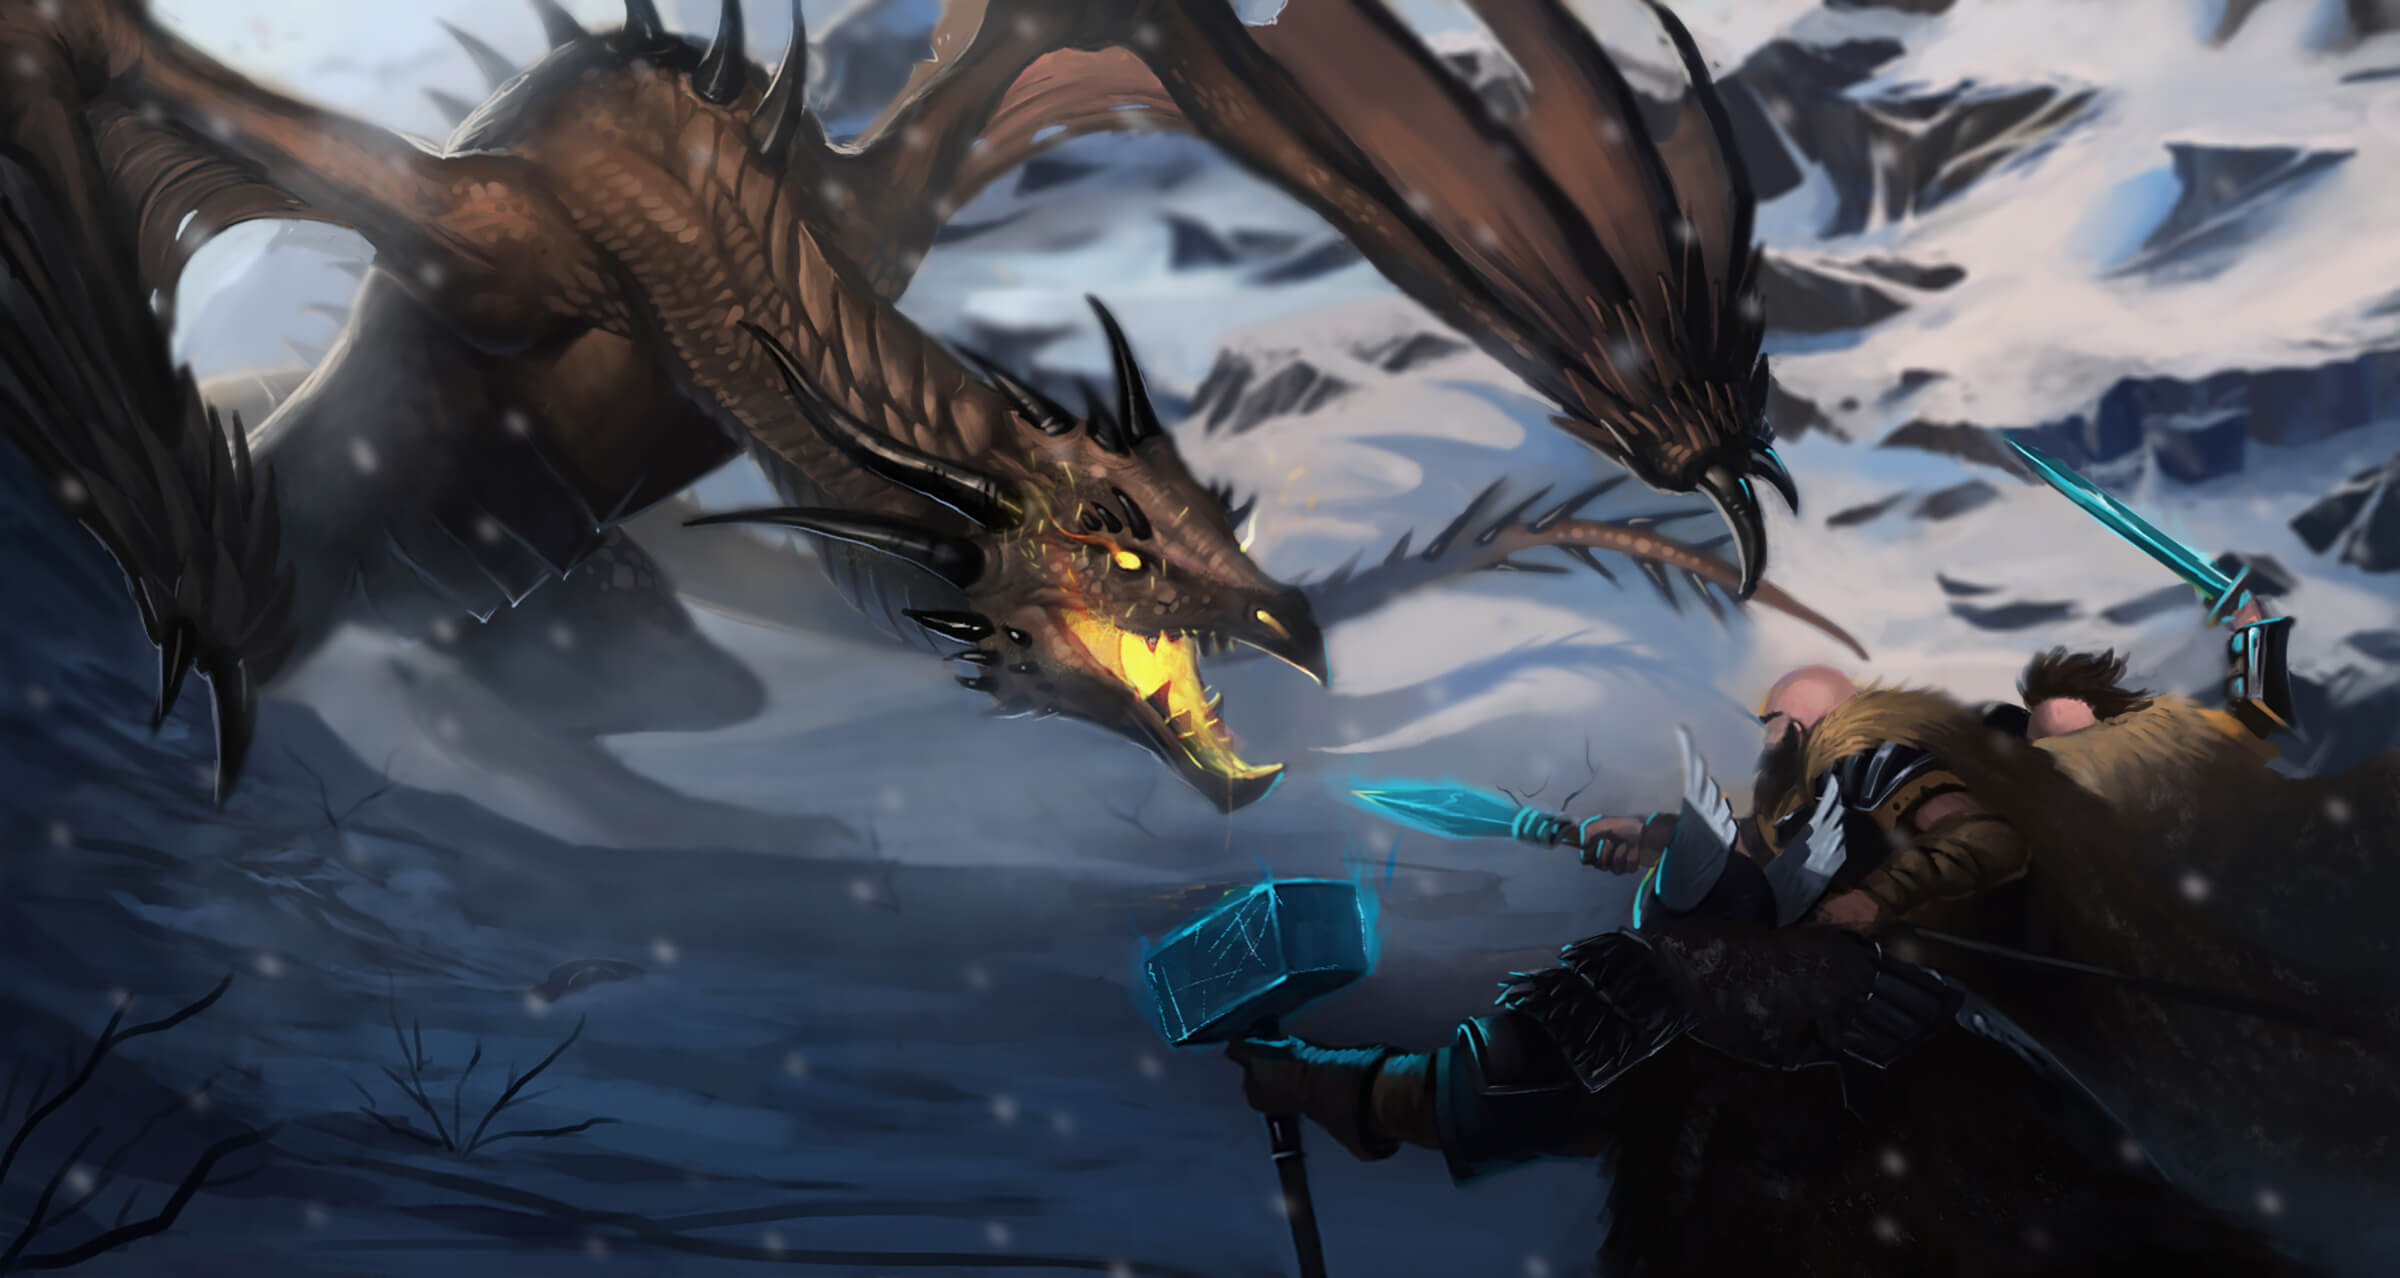 Sword-, spear-, and hammer-wielding warriors confront a large, brown dragon in a snowy environment.